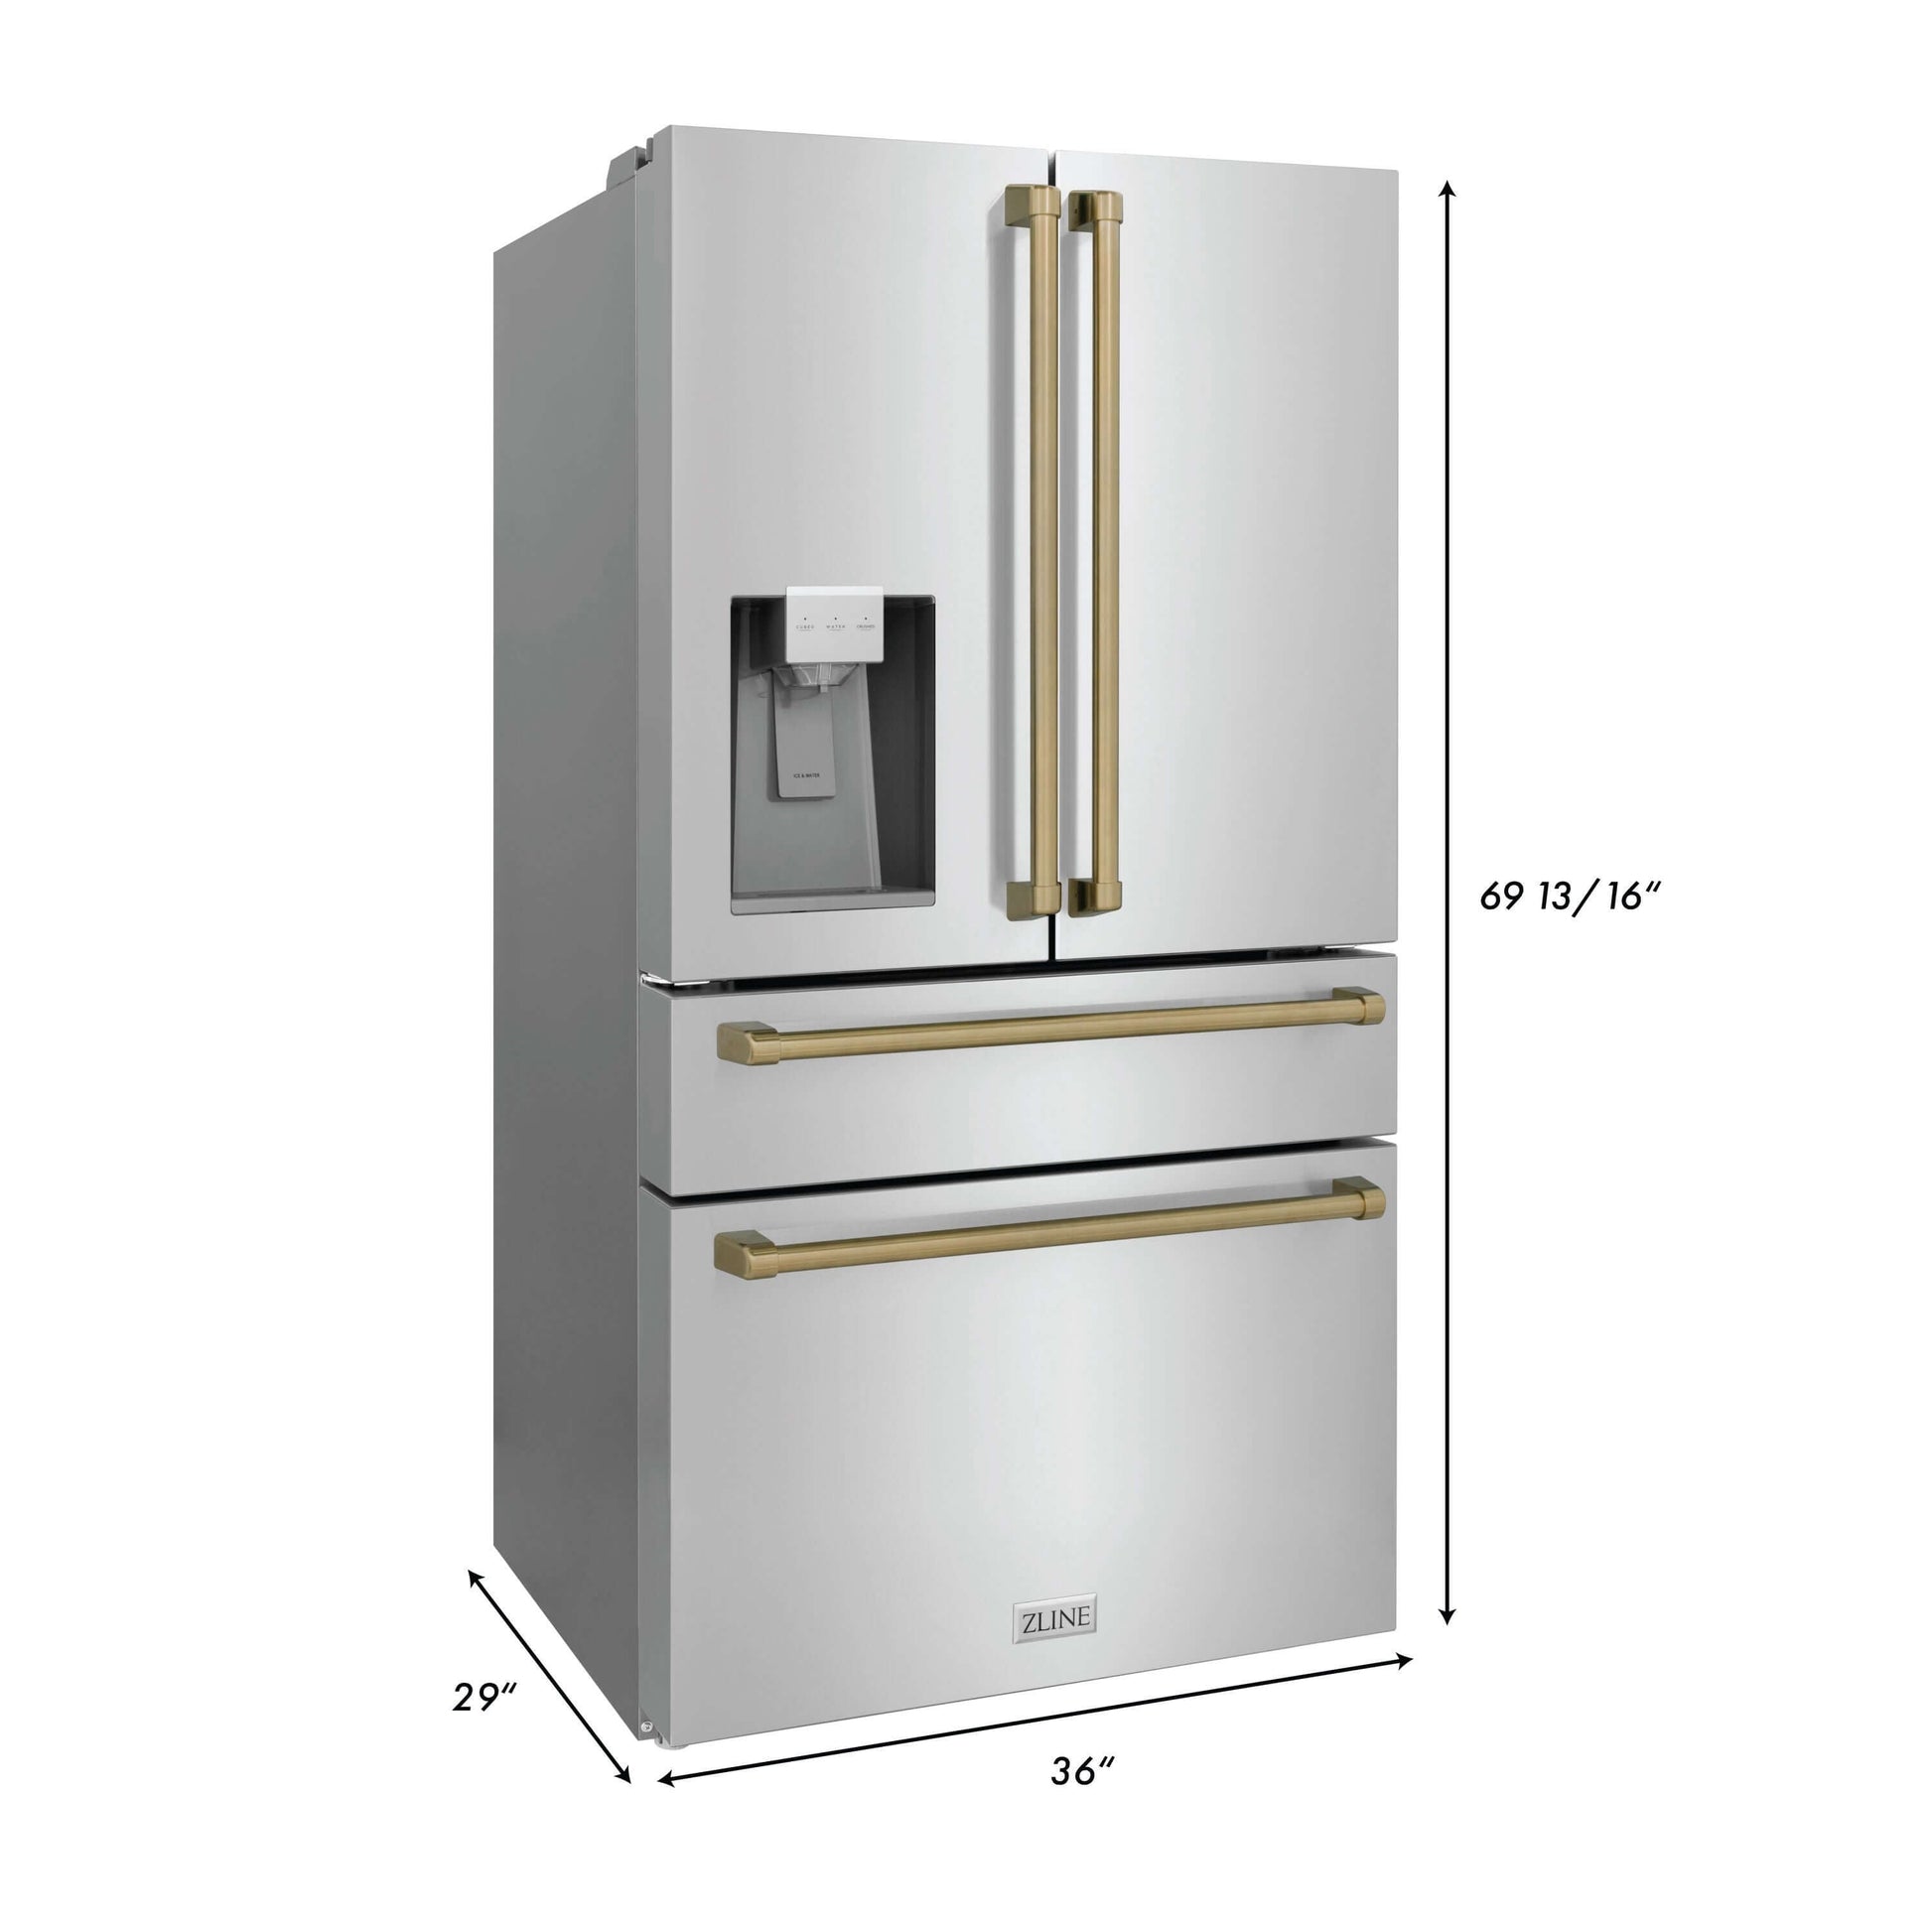 ZLINE 36" Autograph Edition Freestanding French Door Refrigerator with External Water and Ice Dispenser - Stainless Steel with Accents